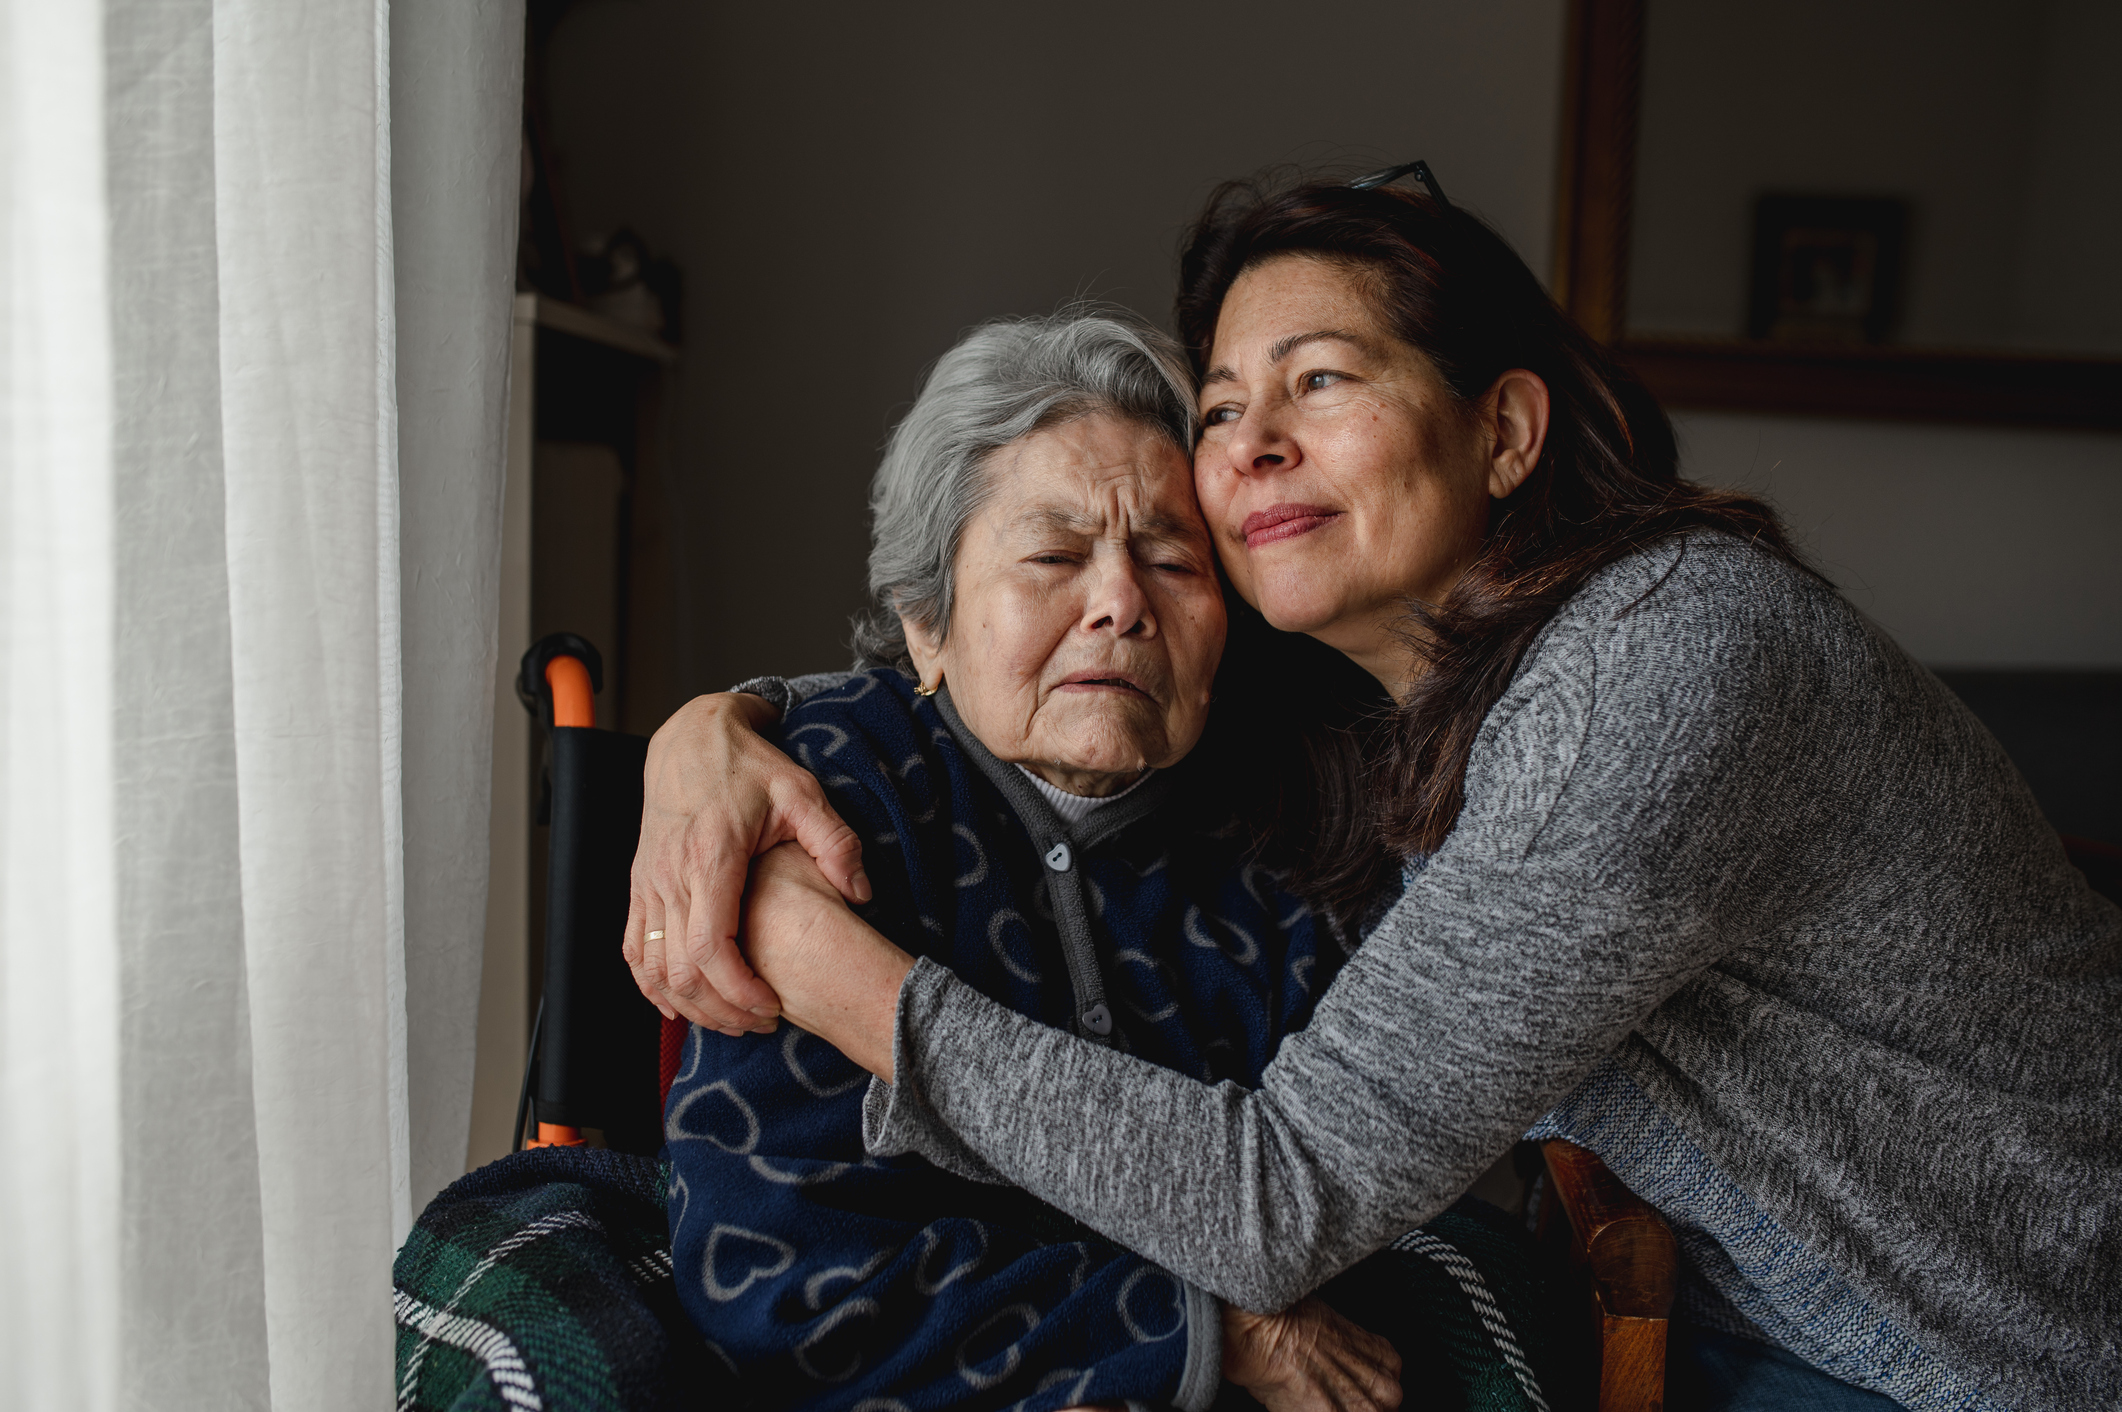 6 Great Strategies for Speaking to Siblings About Aging Parents